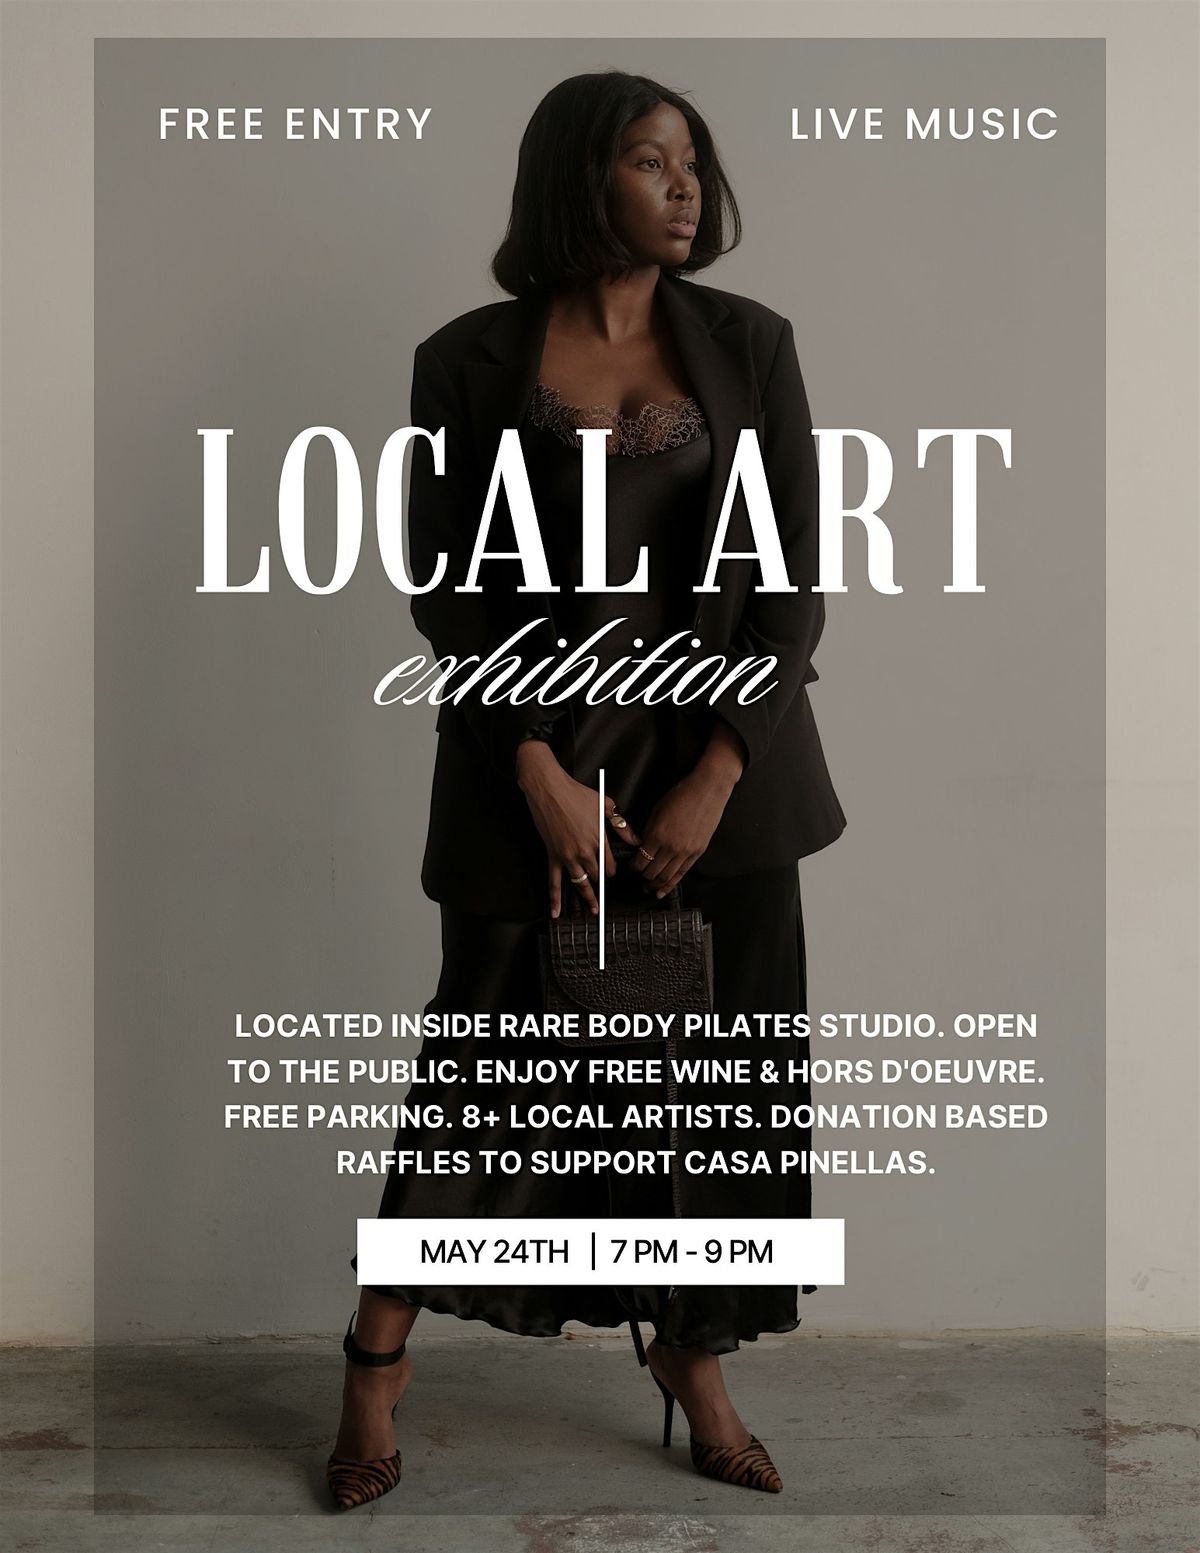 FREE LOCAL ART EXHIBITION ST. PETE